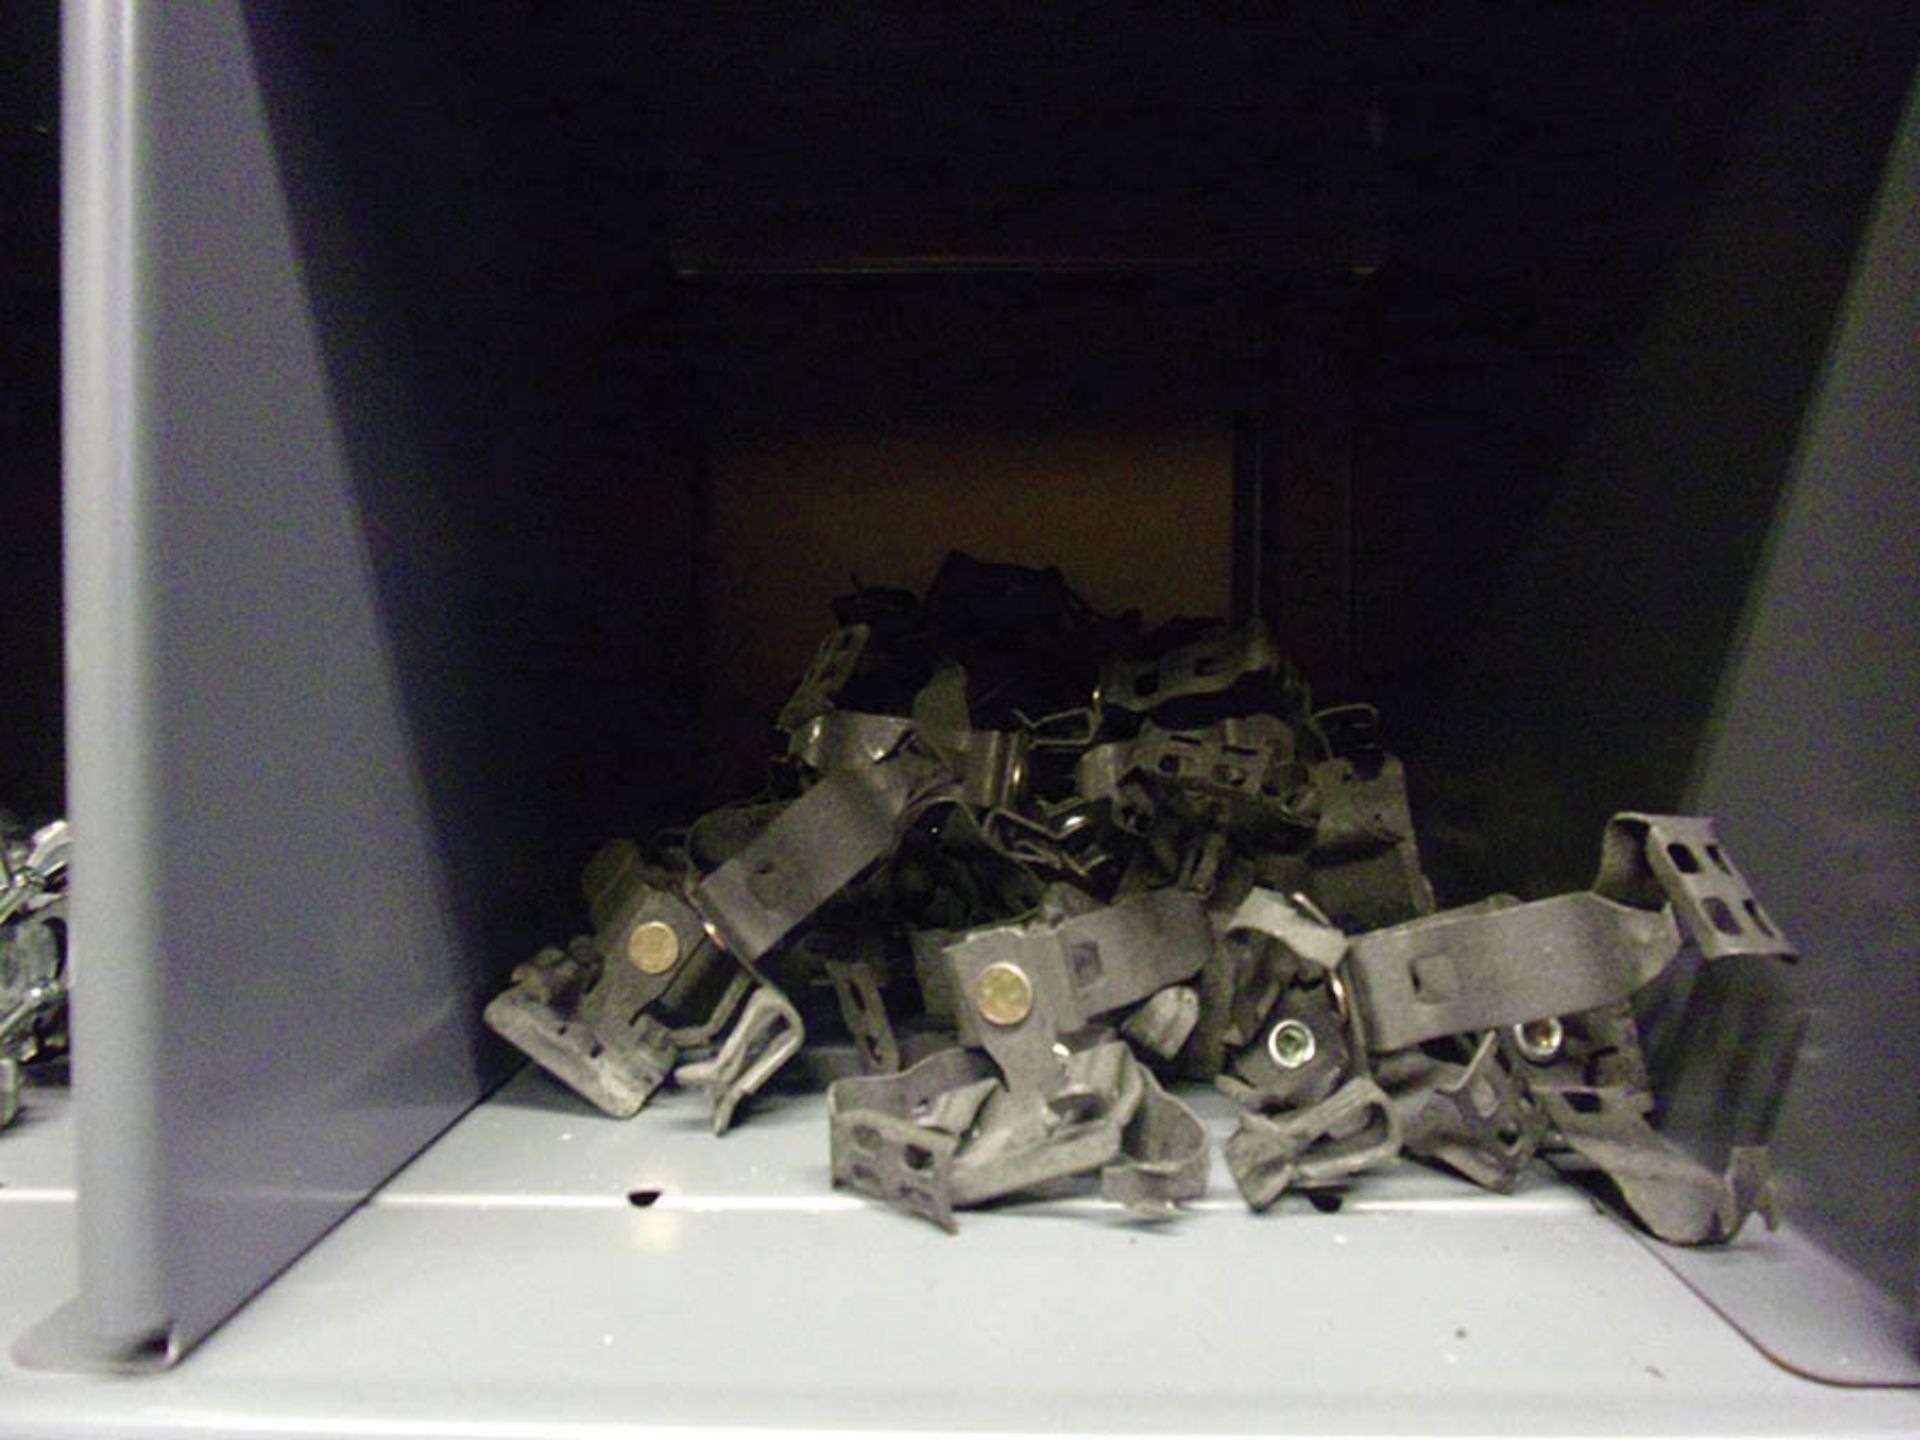 PARTS BIN WITH CONTENTS; HANGERS, COVERS, AND FITTINGS - Image 4 of 4